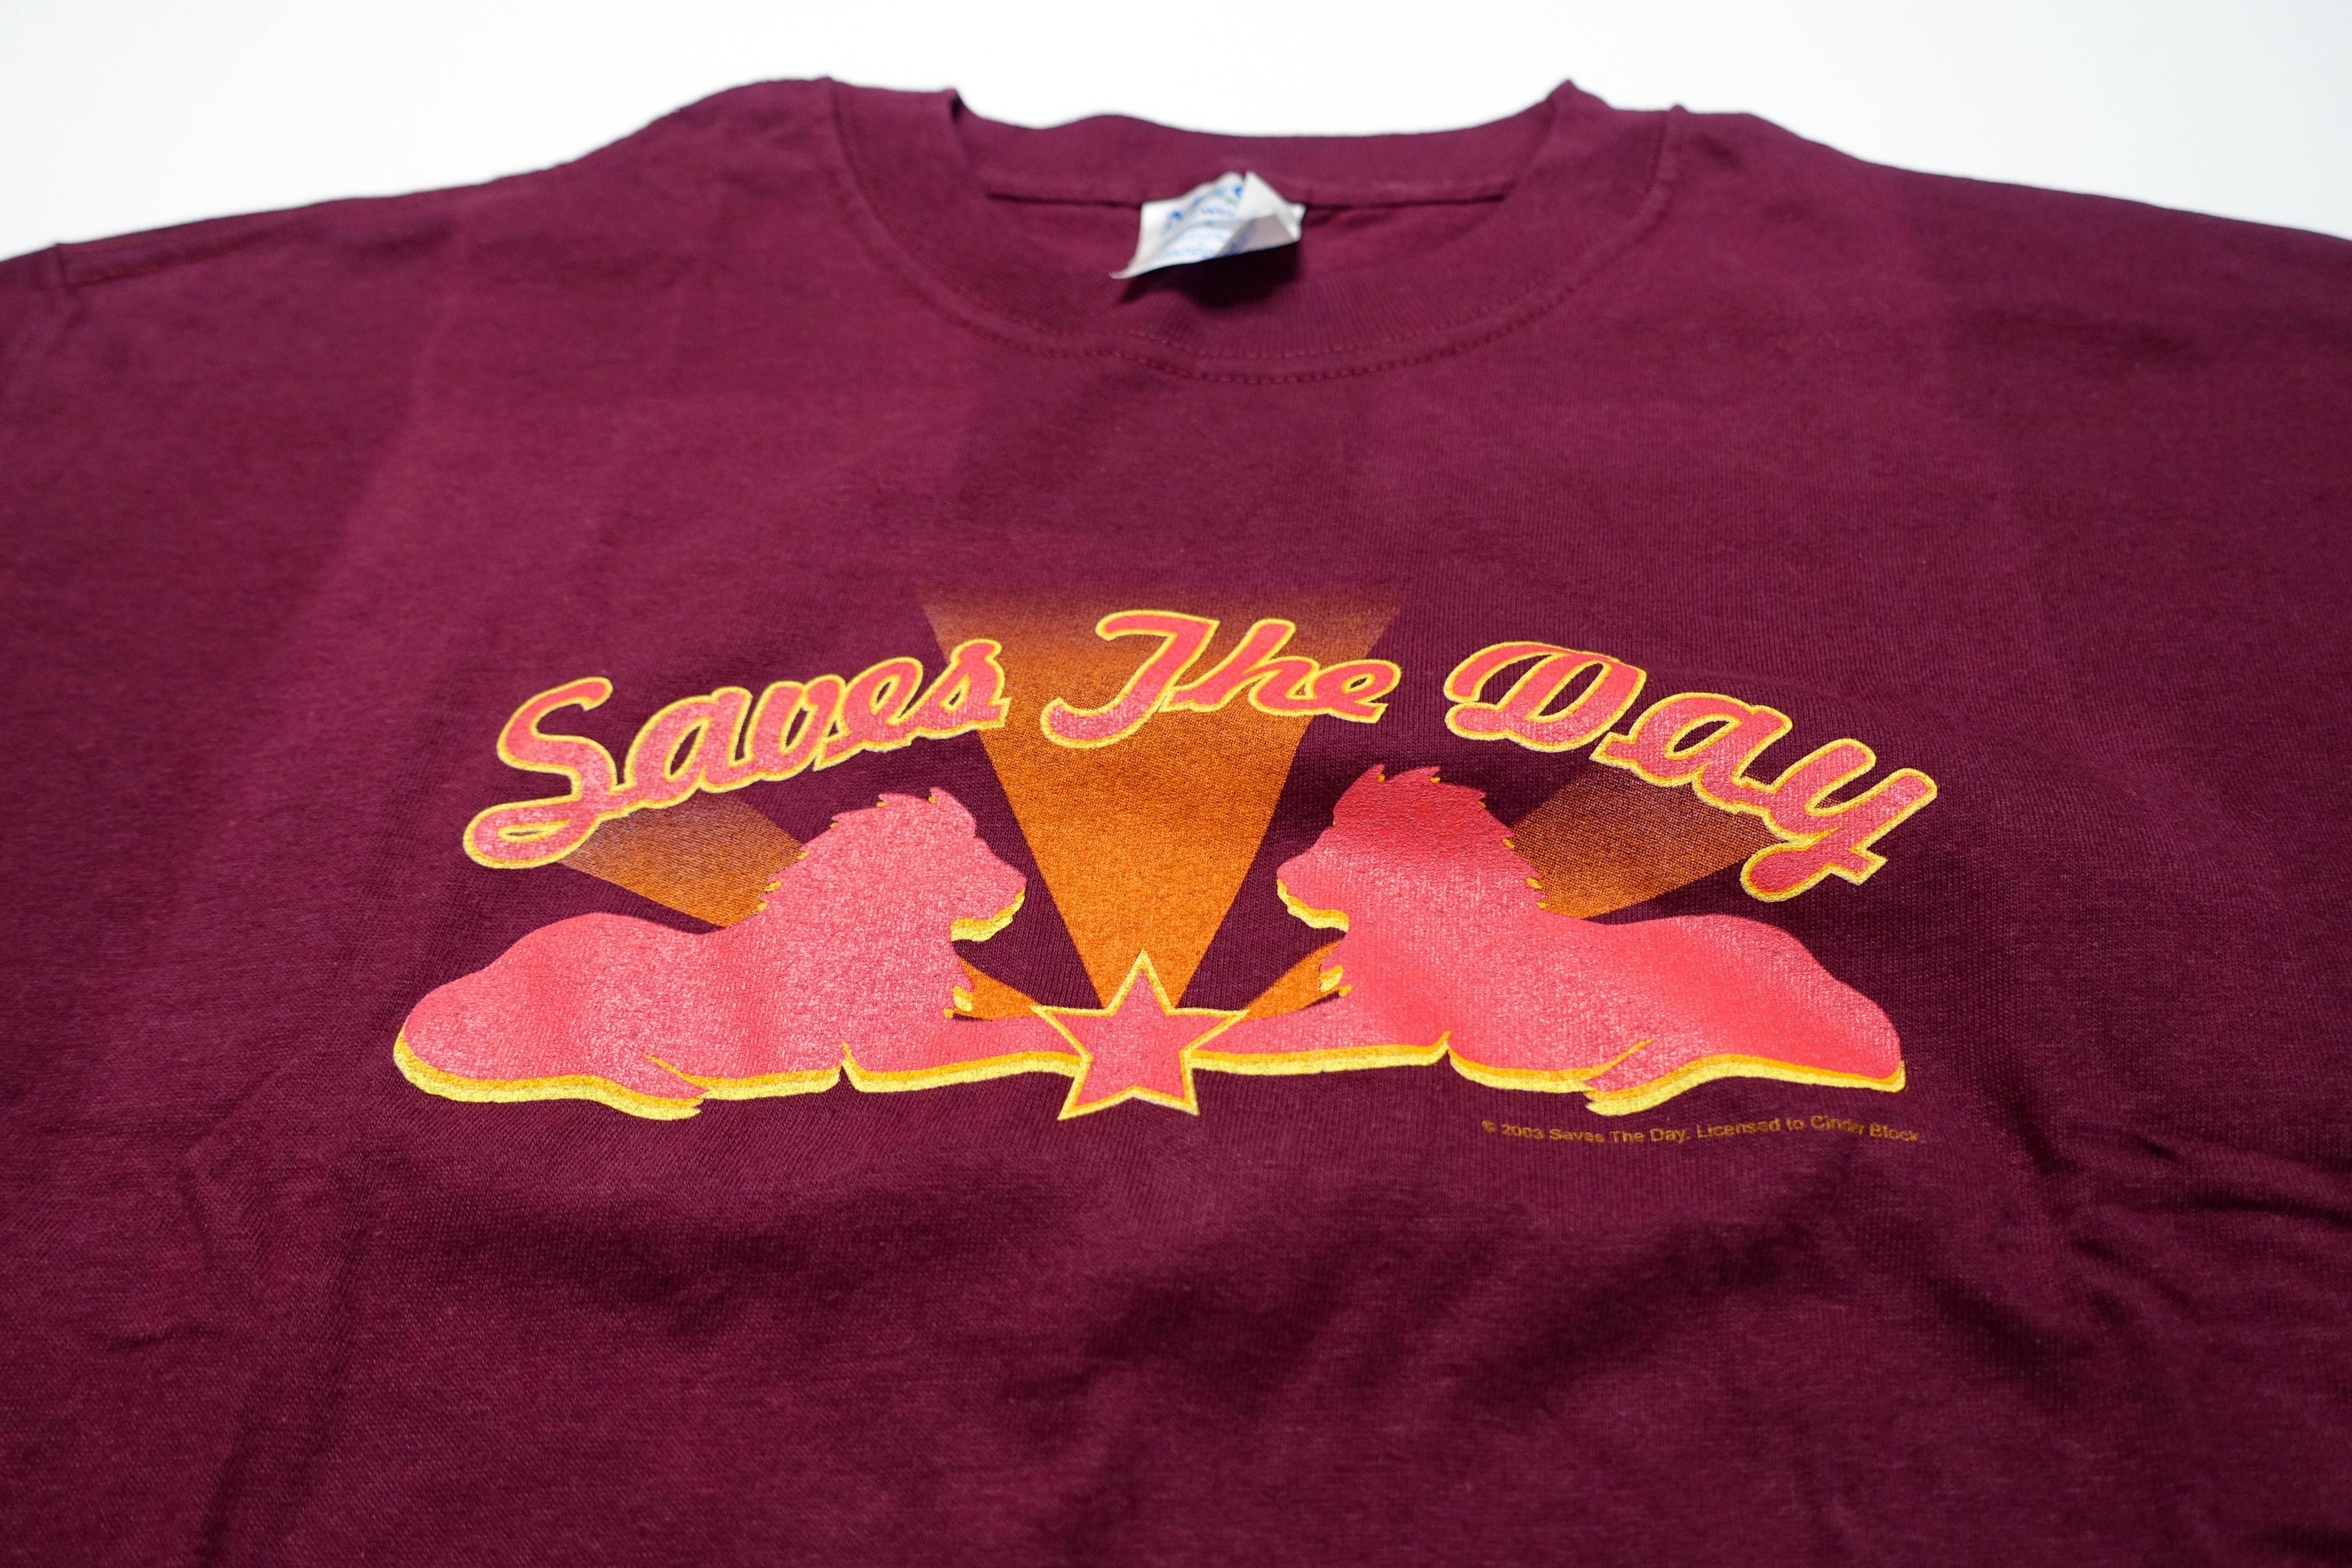 Saves The Day - In Reverie Lions 2003 Tour Shirt Size Large